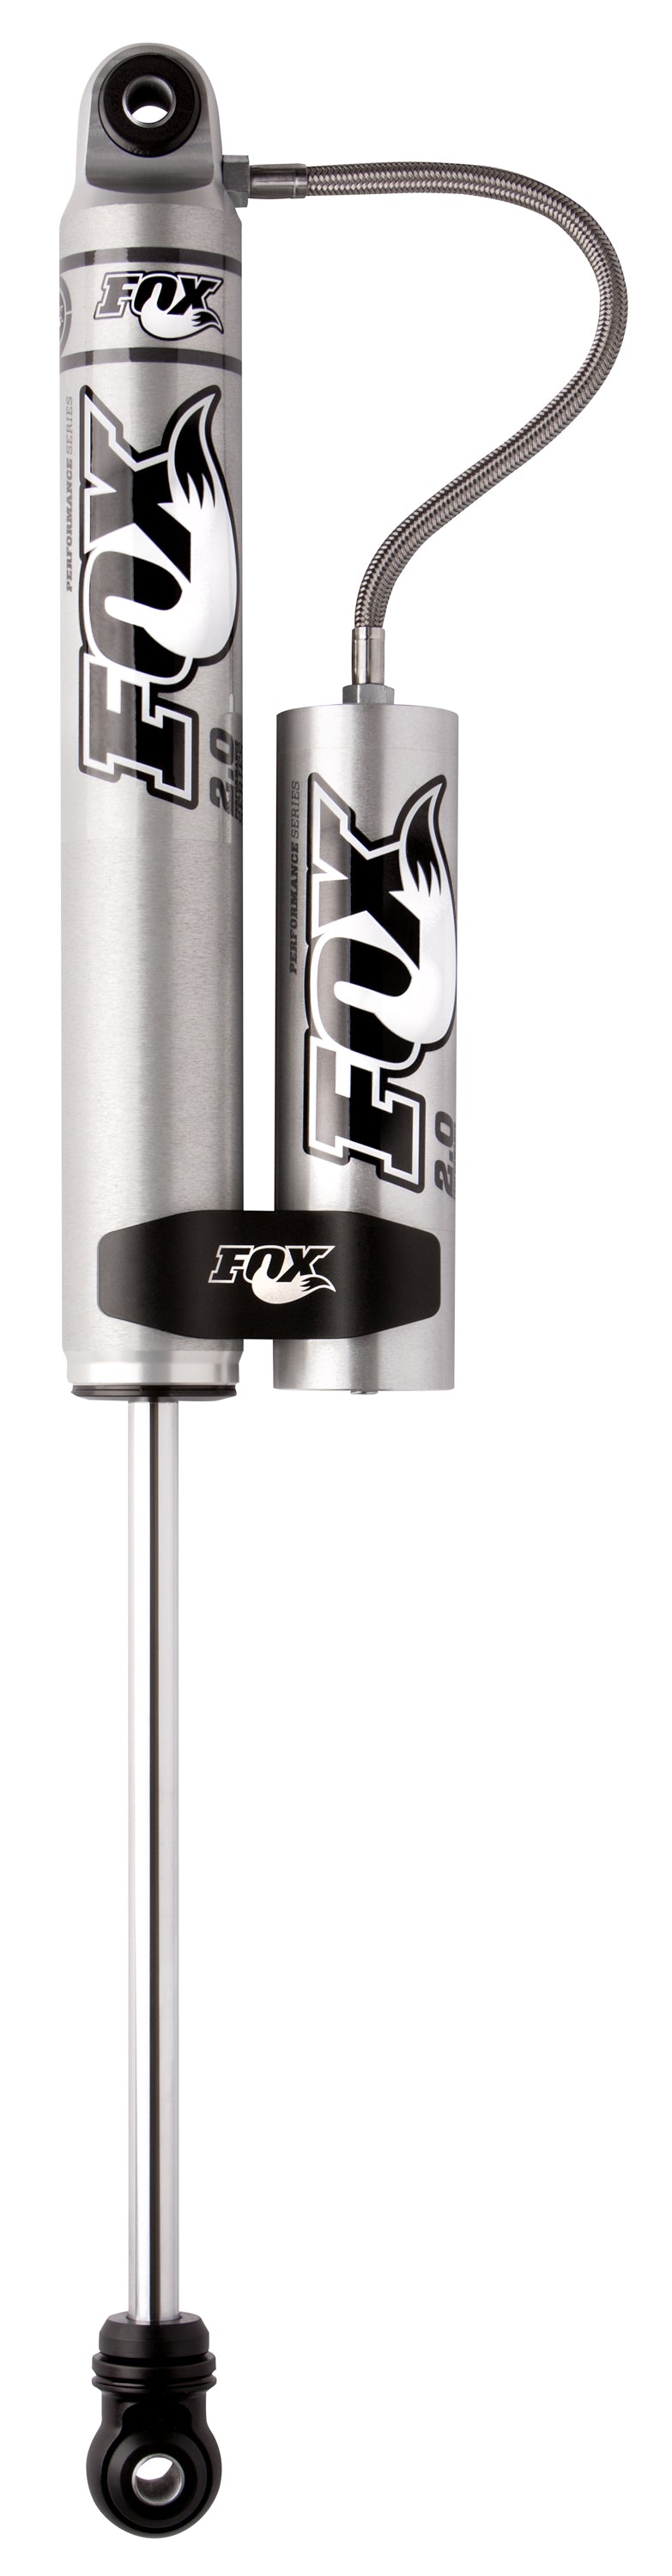 FOX Offroad Shocks 985-24-140 PERFORMANCE SERIES 2.0 SMOOTH BODY RESERVOIR SHOCK - Roam Overland Outfitters